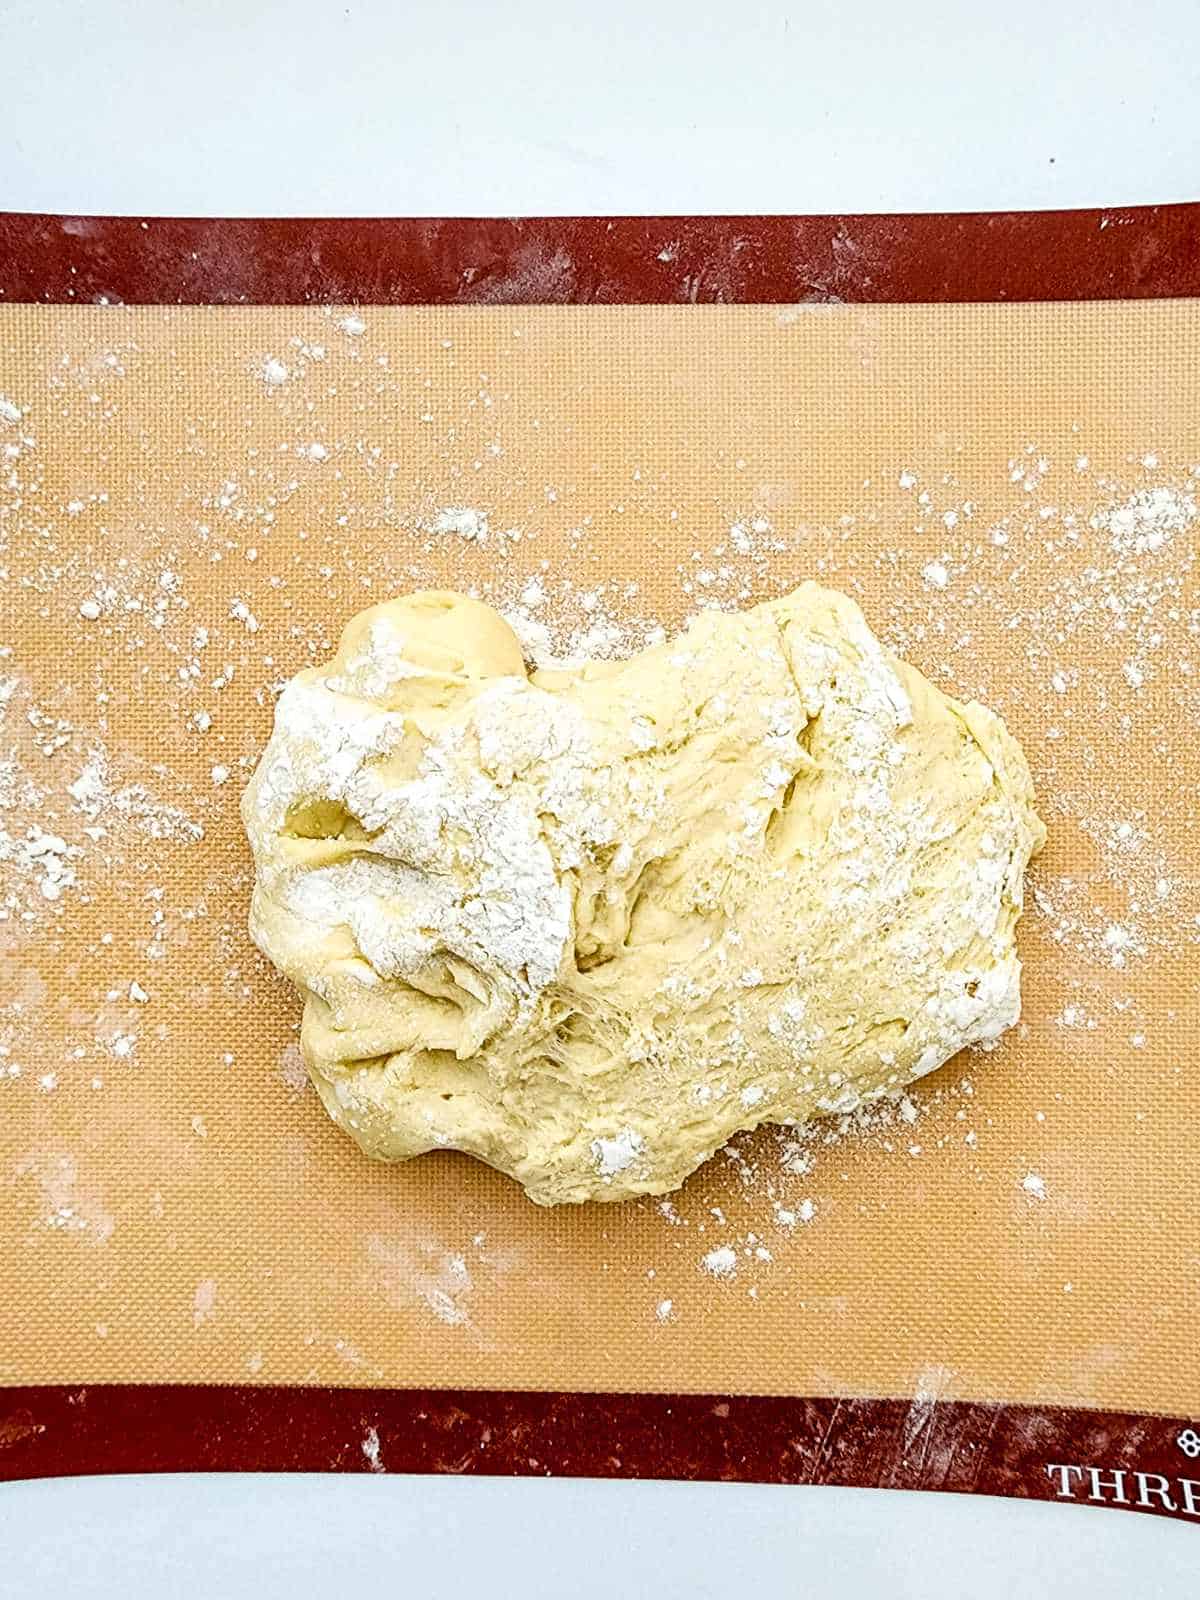 Ball of sweet dough on a rolling mat with a little flour to knead and shape dough.